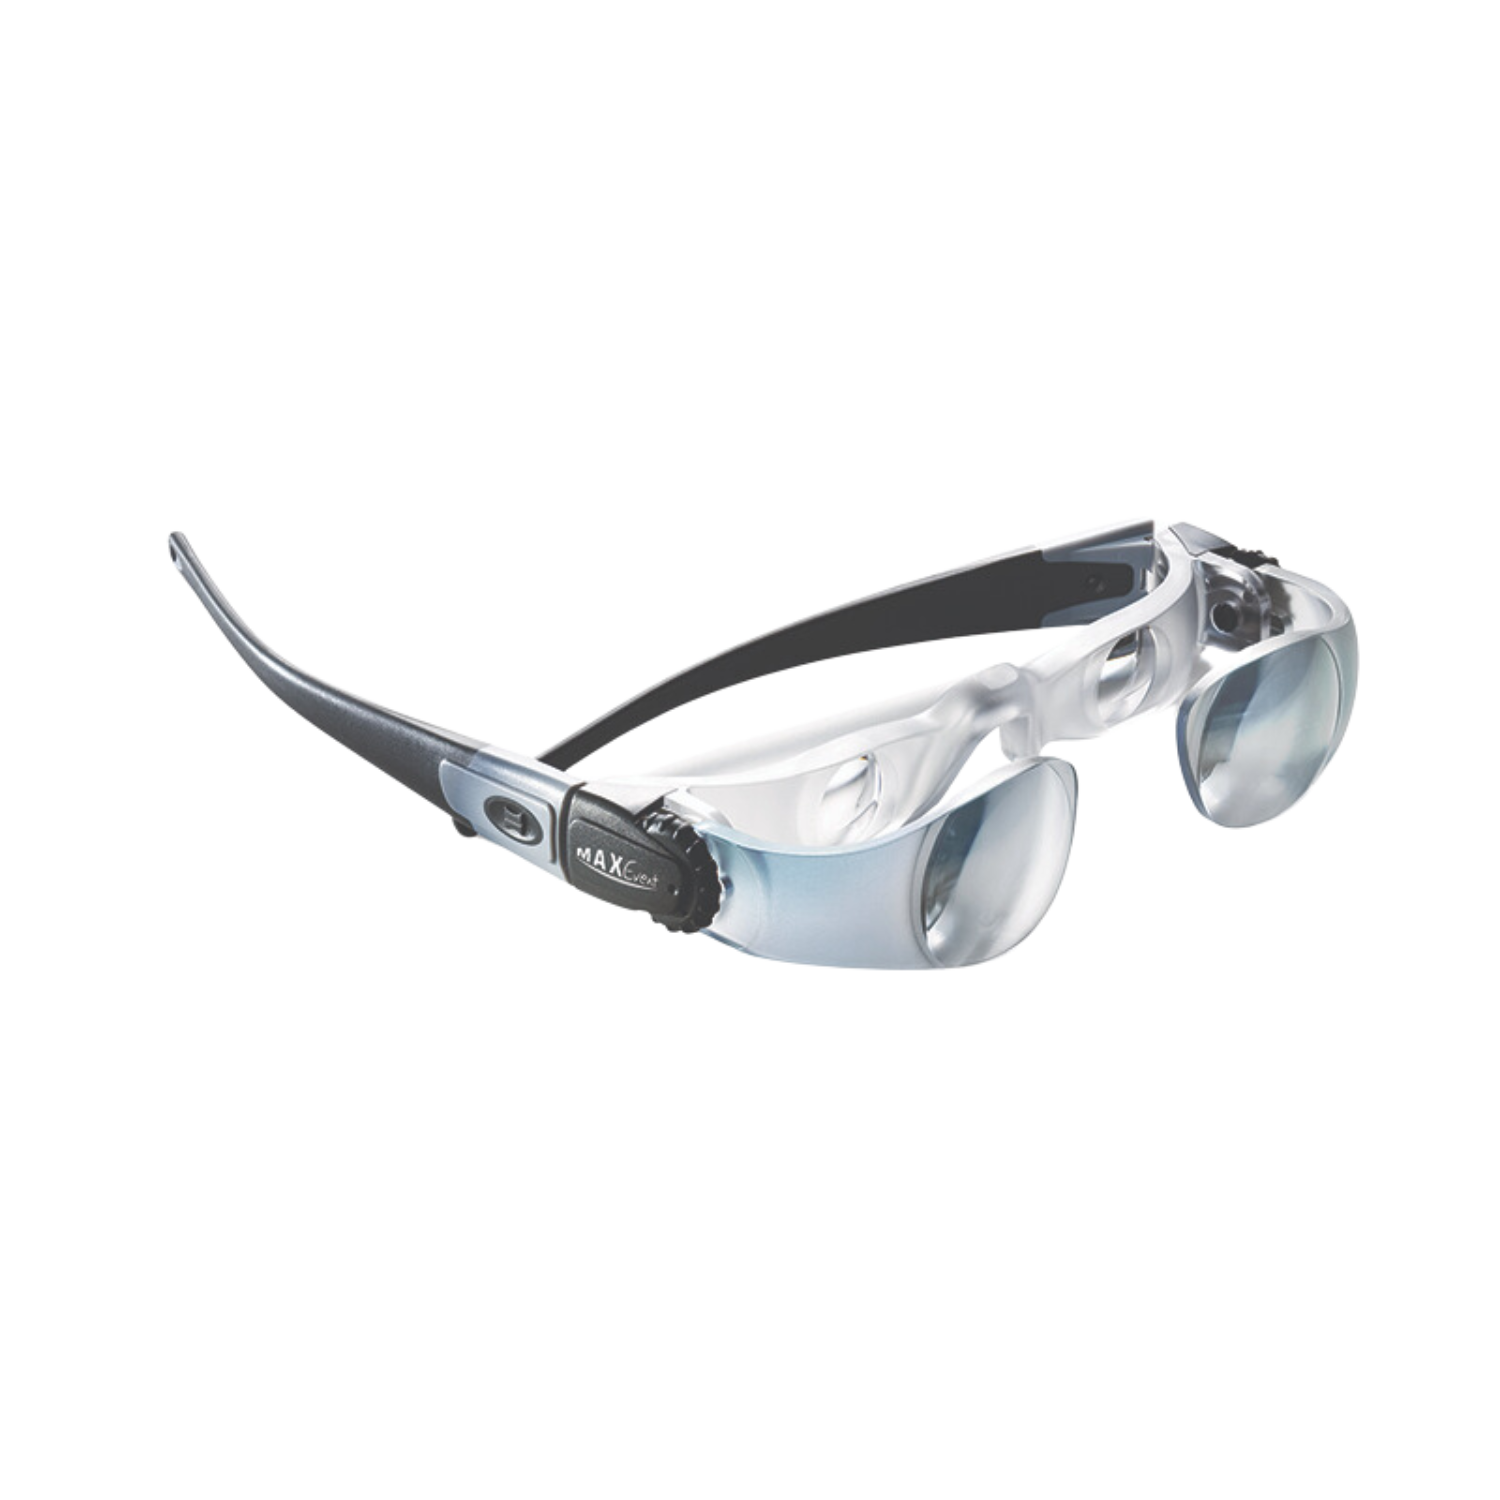 Image of the MaxEvent wearable binocular glasses from Eschenbach.